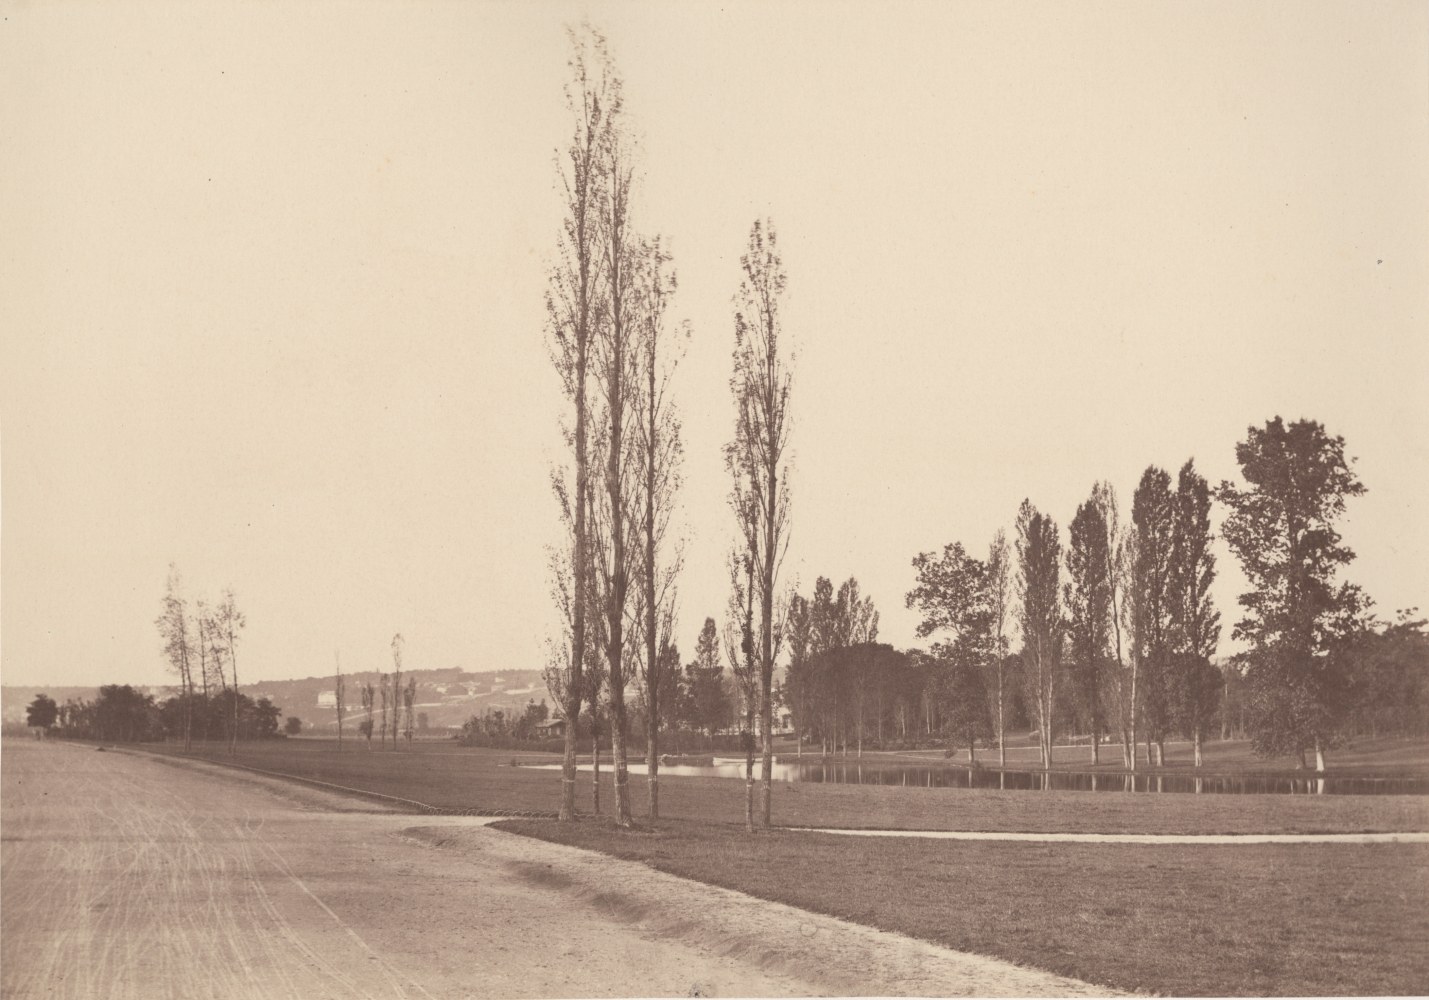 Charles MARVILLE (French, 1813-1879) Paysage du Bois de Boulogne, 1858 Albumen print from a collodion negative 25.0 x 35.8 cm mounted on 41.0 x 58.0 cm paper